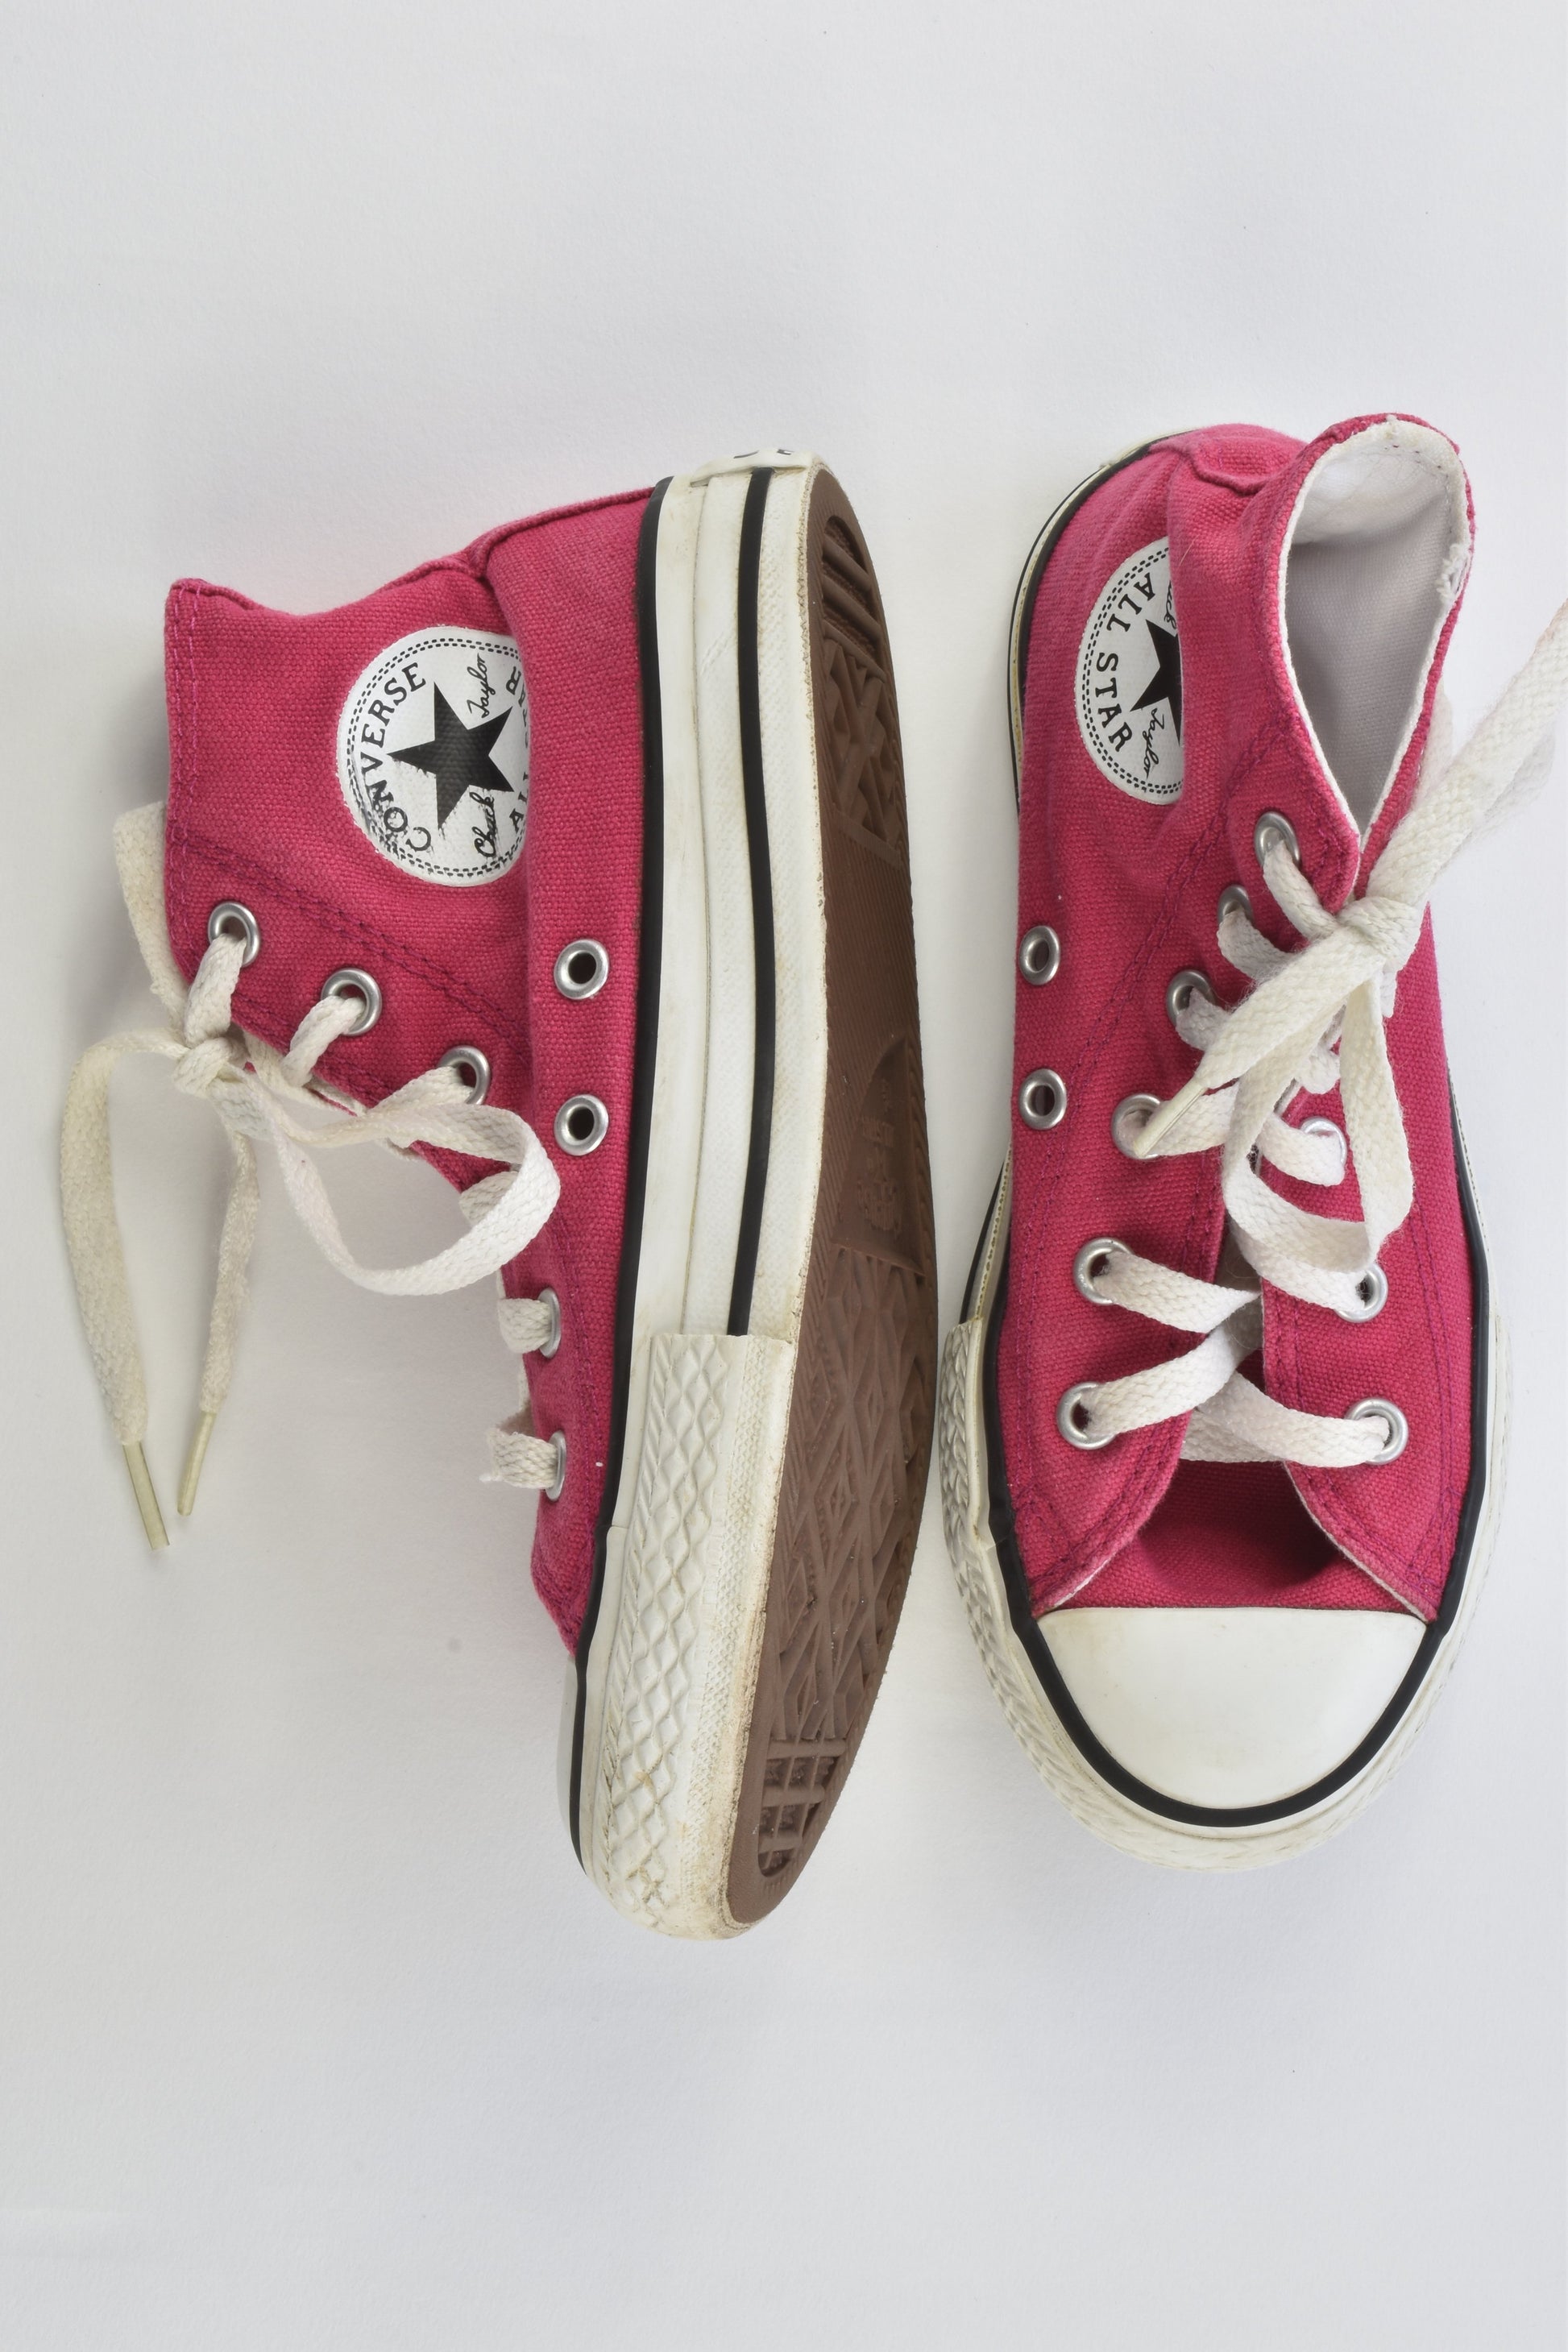 Converse All Star Size UK 12 Shoes